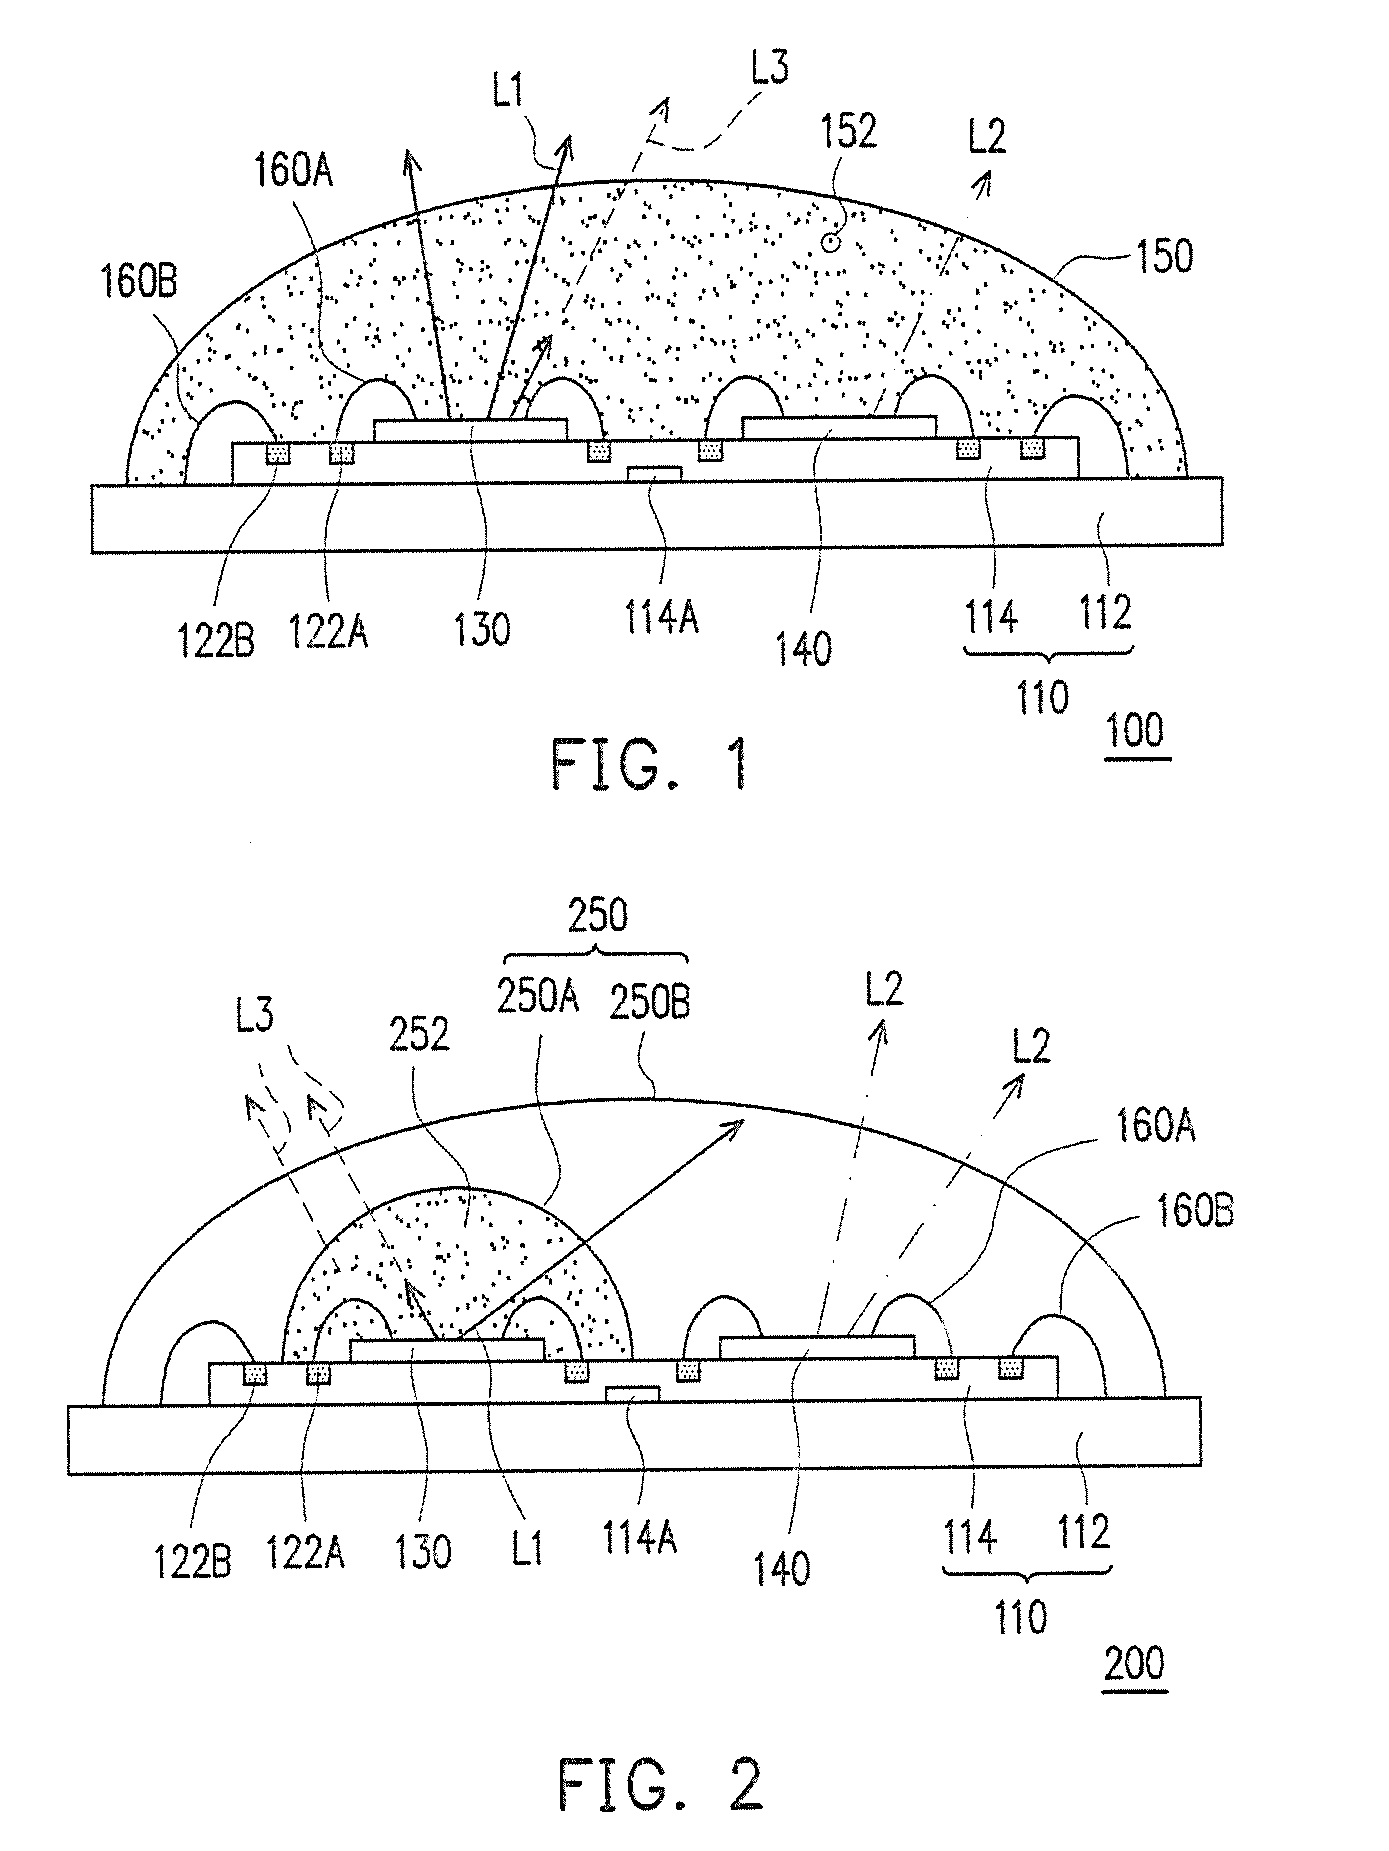 Light emitting diode chip package